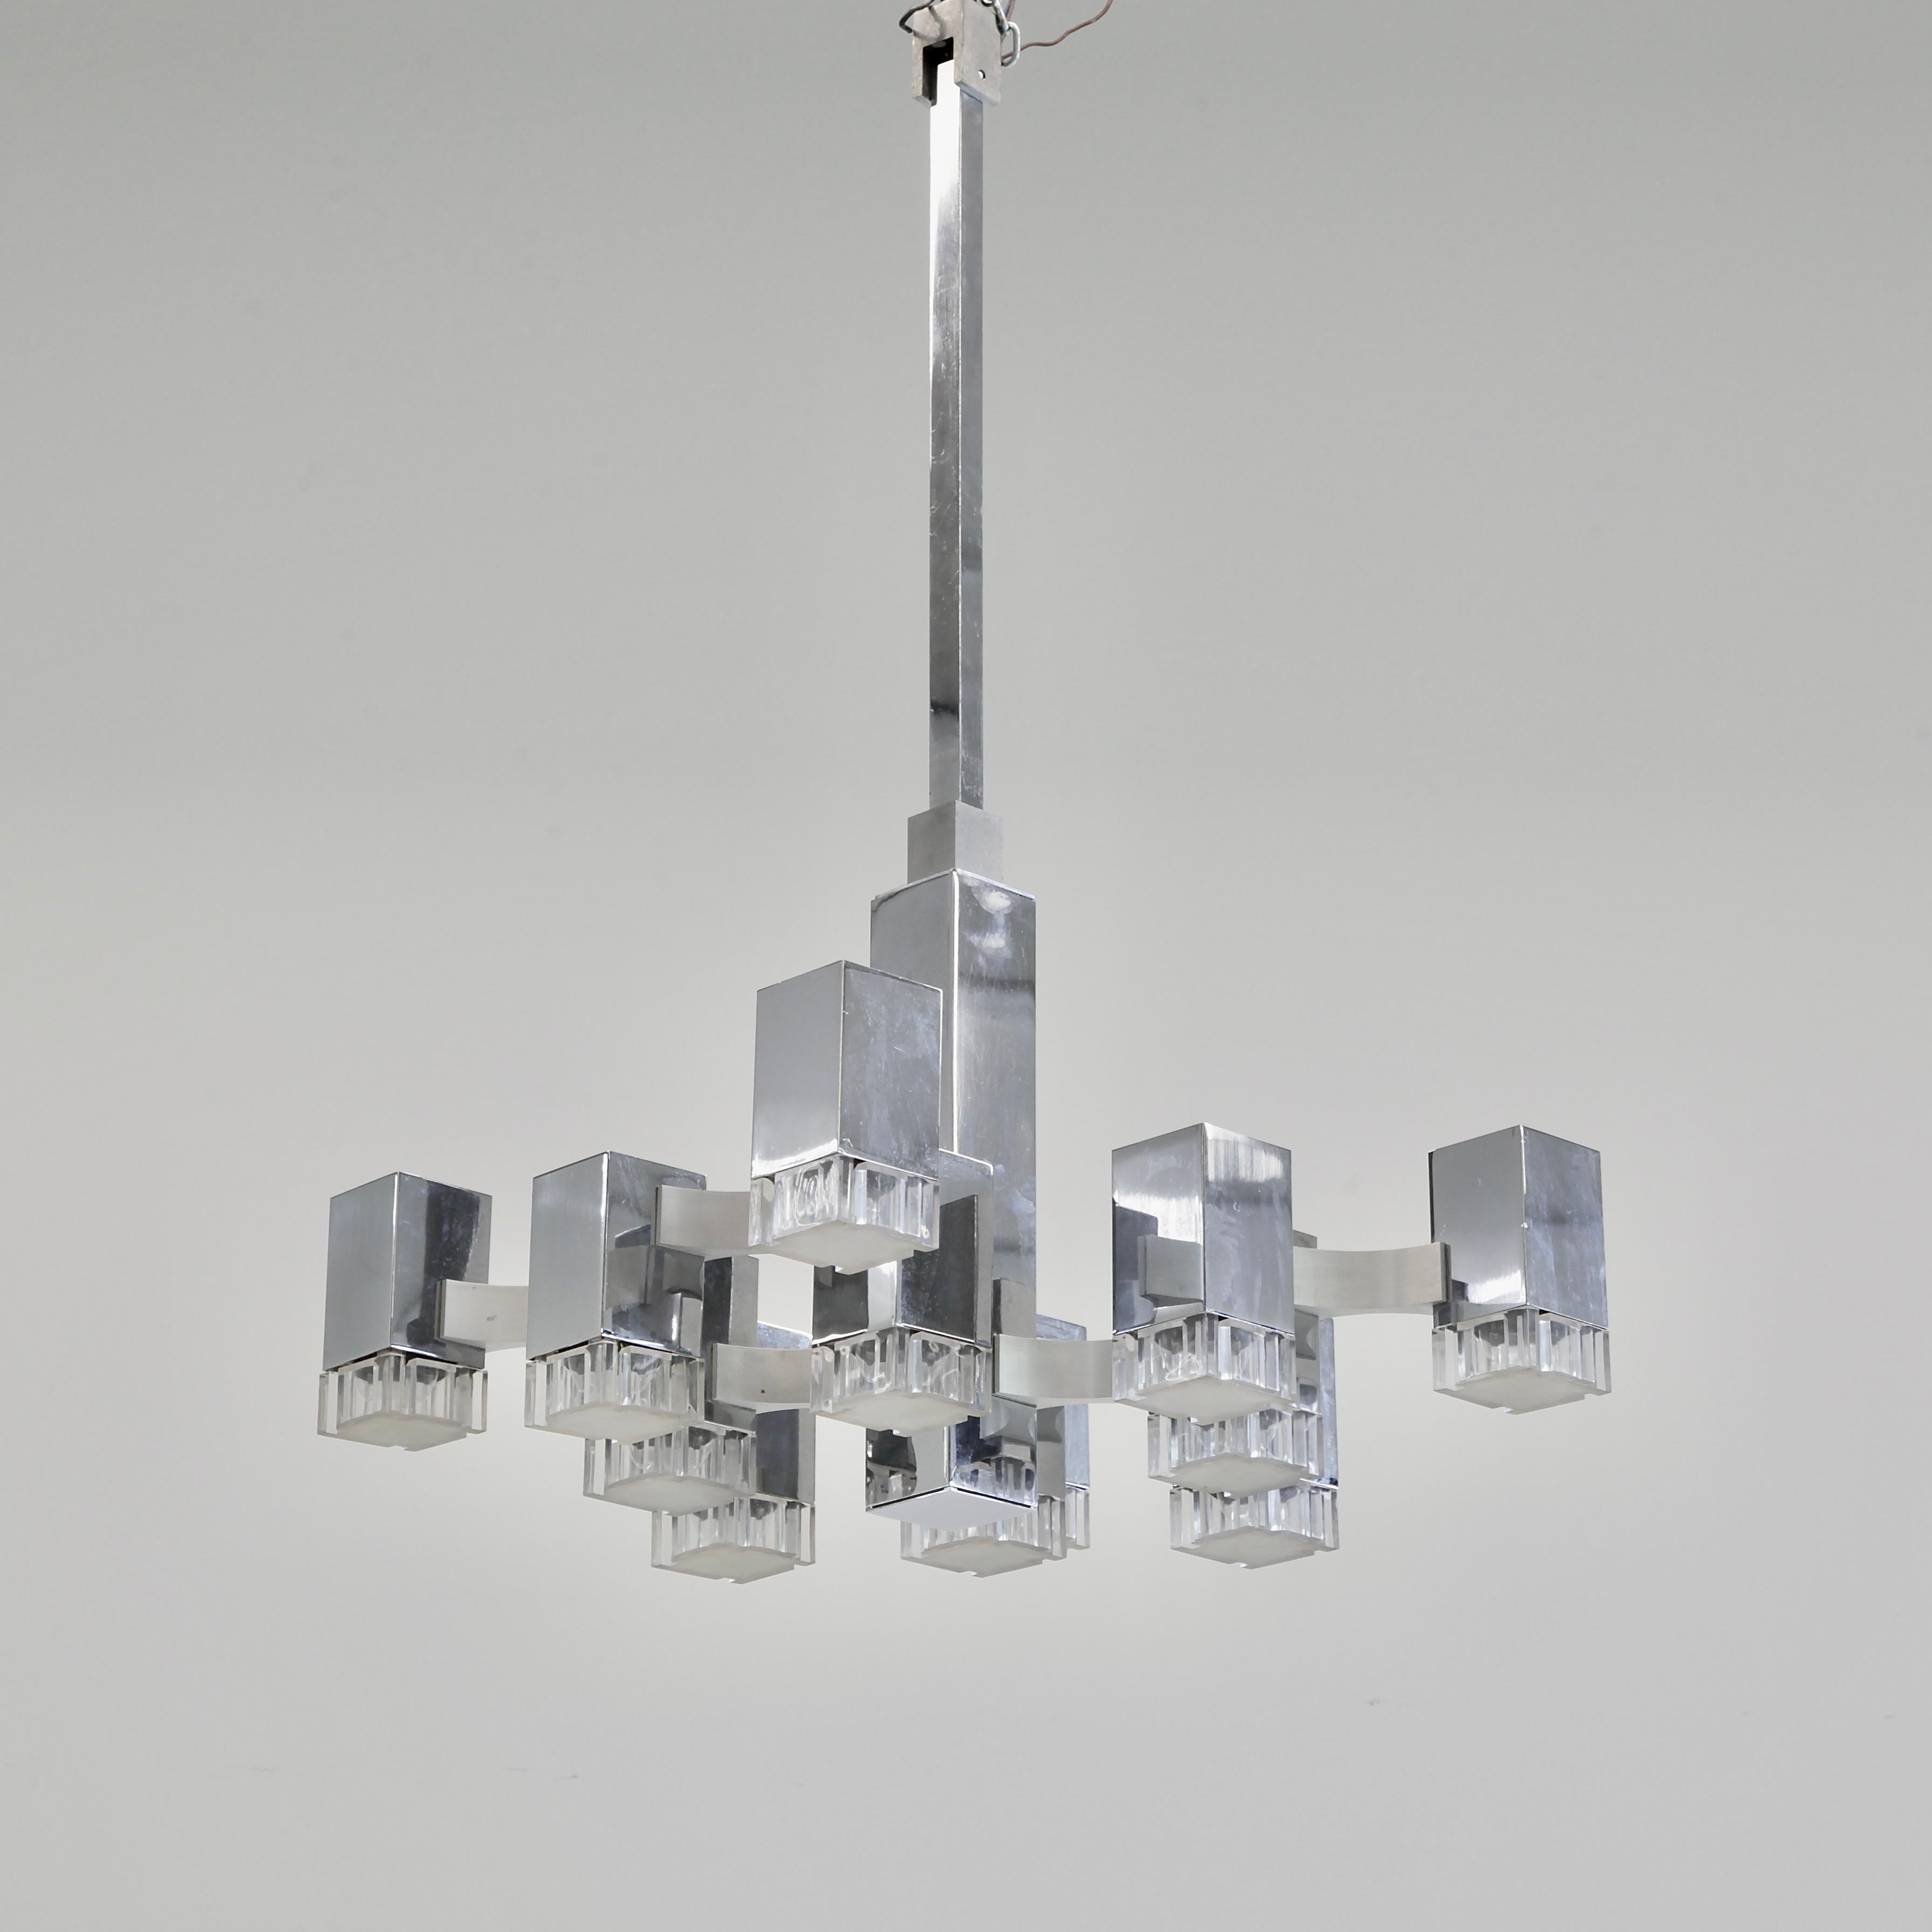 Early nickel plated ceiling light designed by Gaetano Sciolari, Italy, SCIOLARI, 1960s.

The CUBIC ceiling lamp with 12 light fittings, nickel-plated frame, plexiglass diffusers, designed and produced by Sciolari.

While the company 